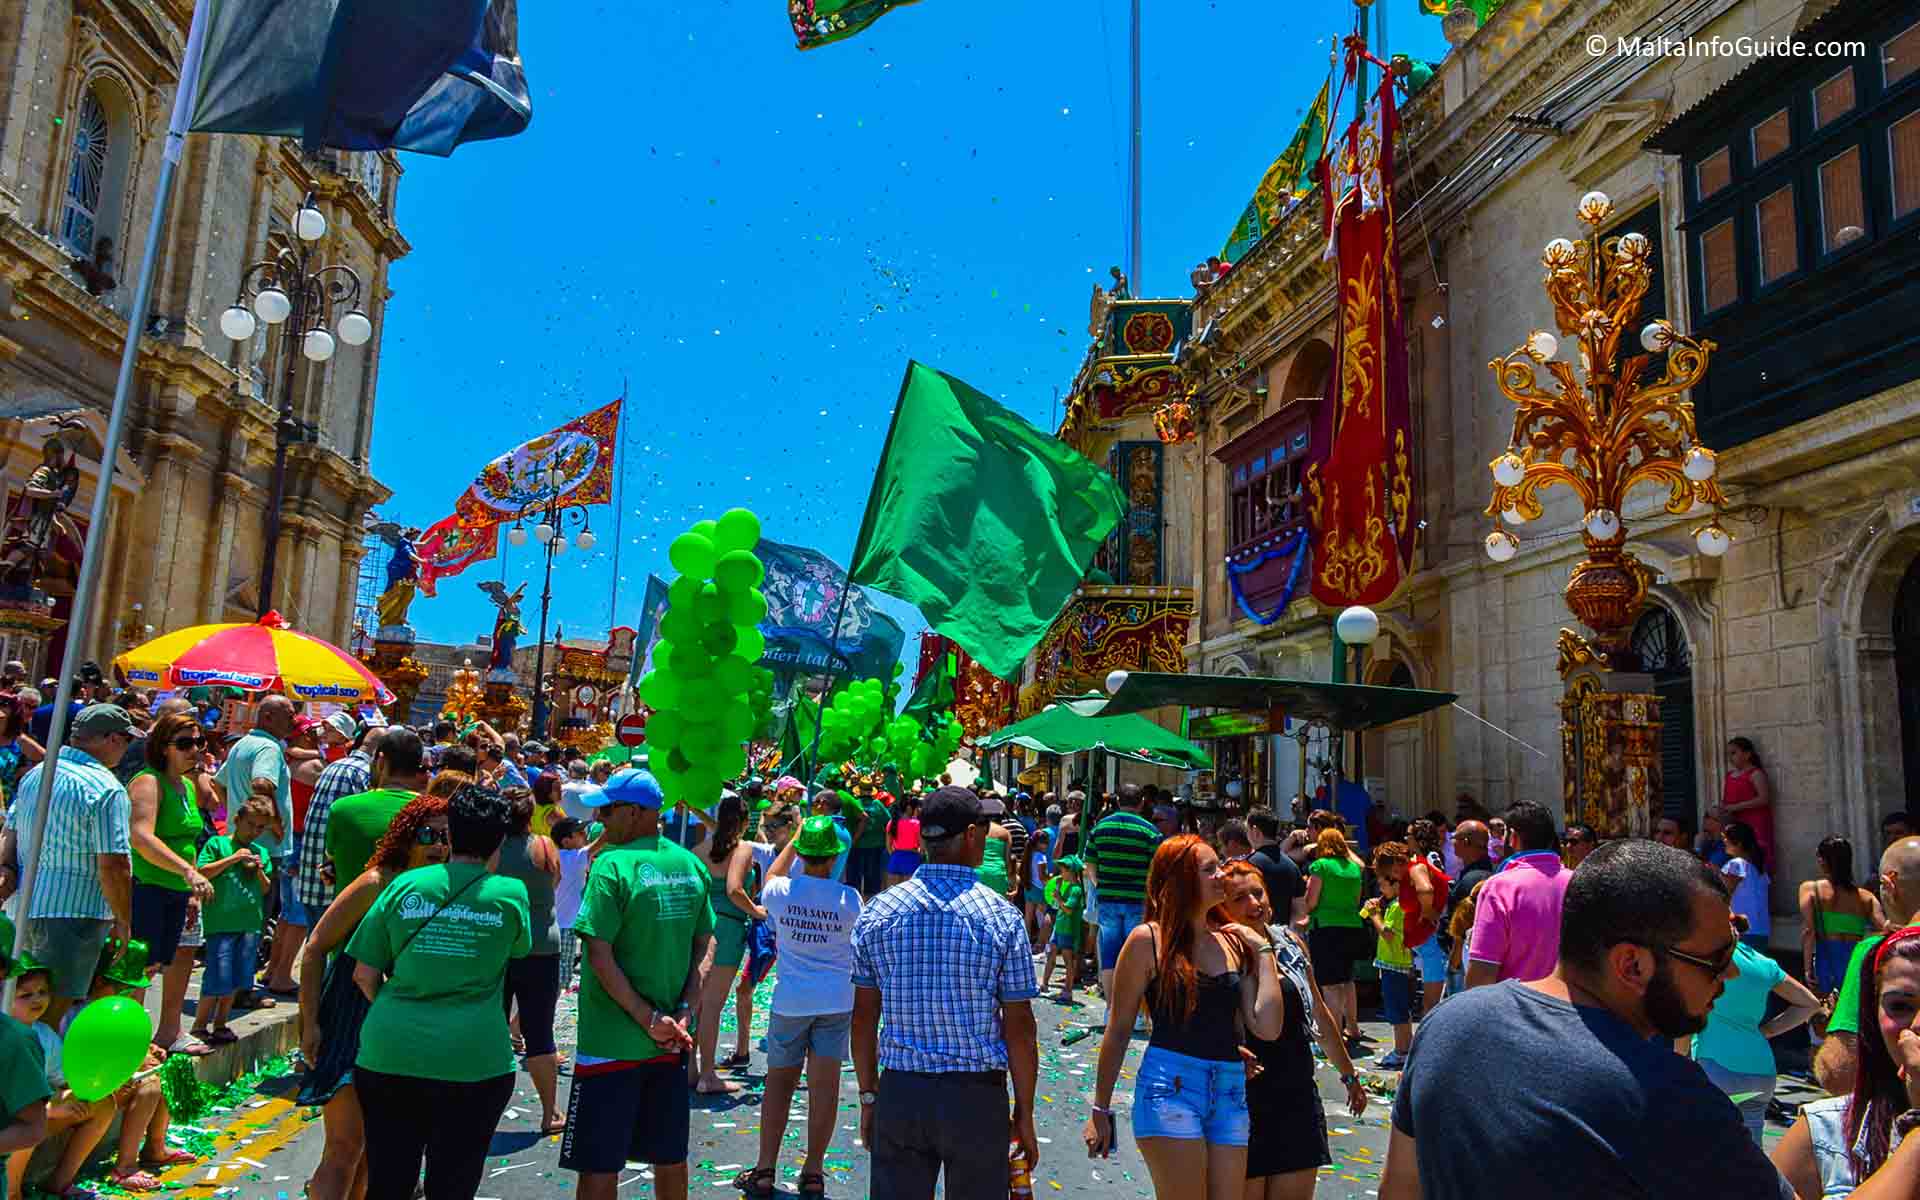 People celebrating at the Zejtun feast on the island of Malta.